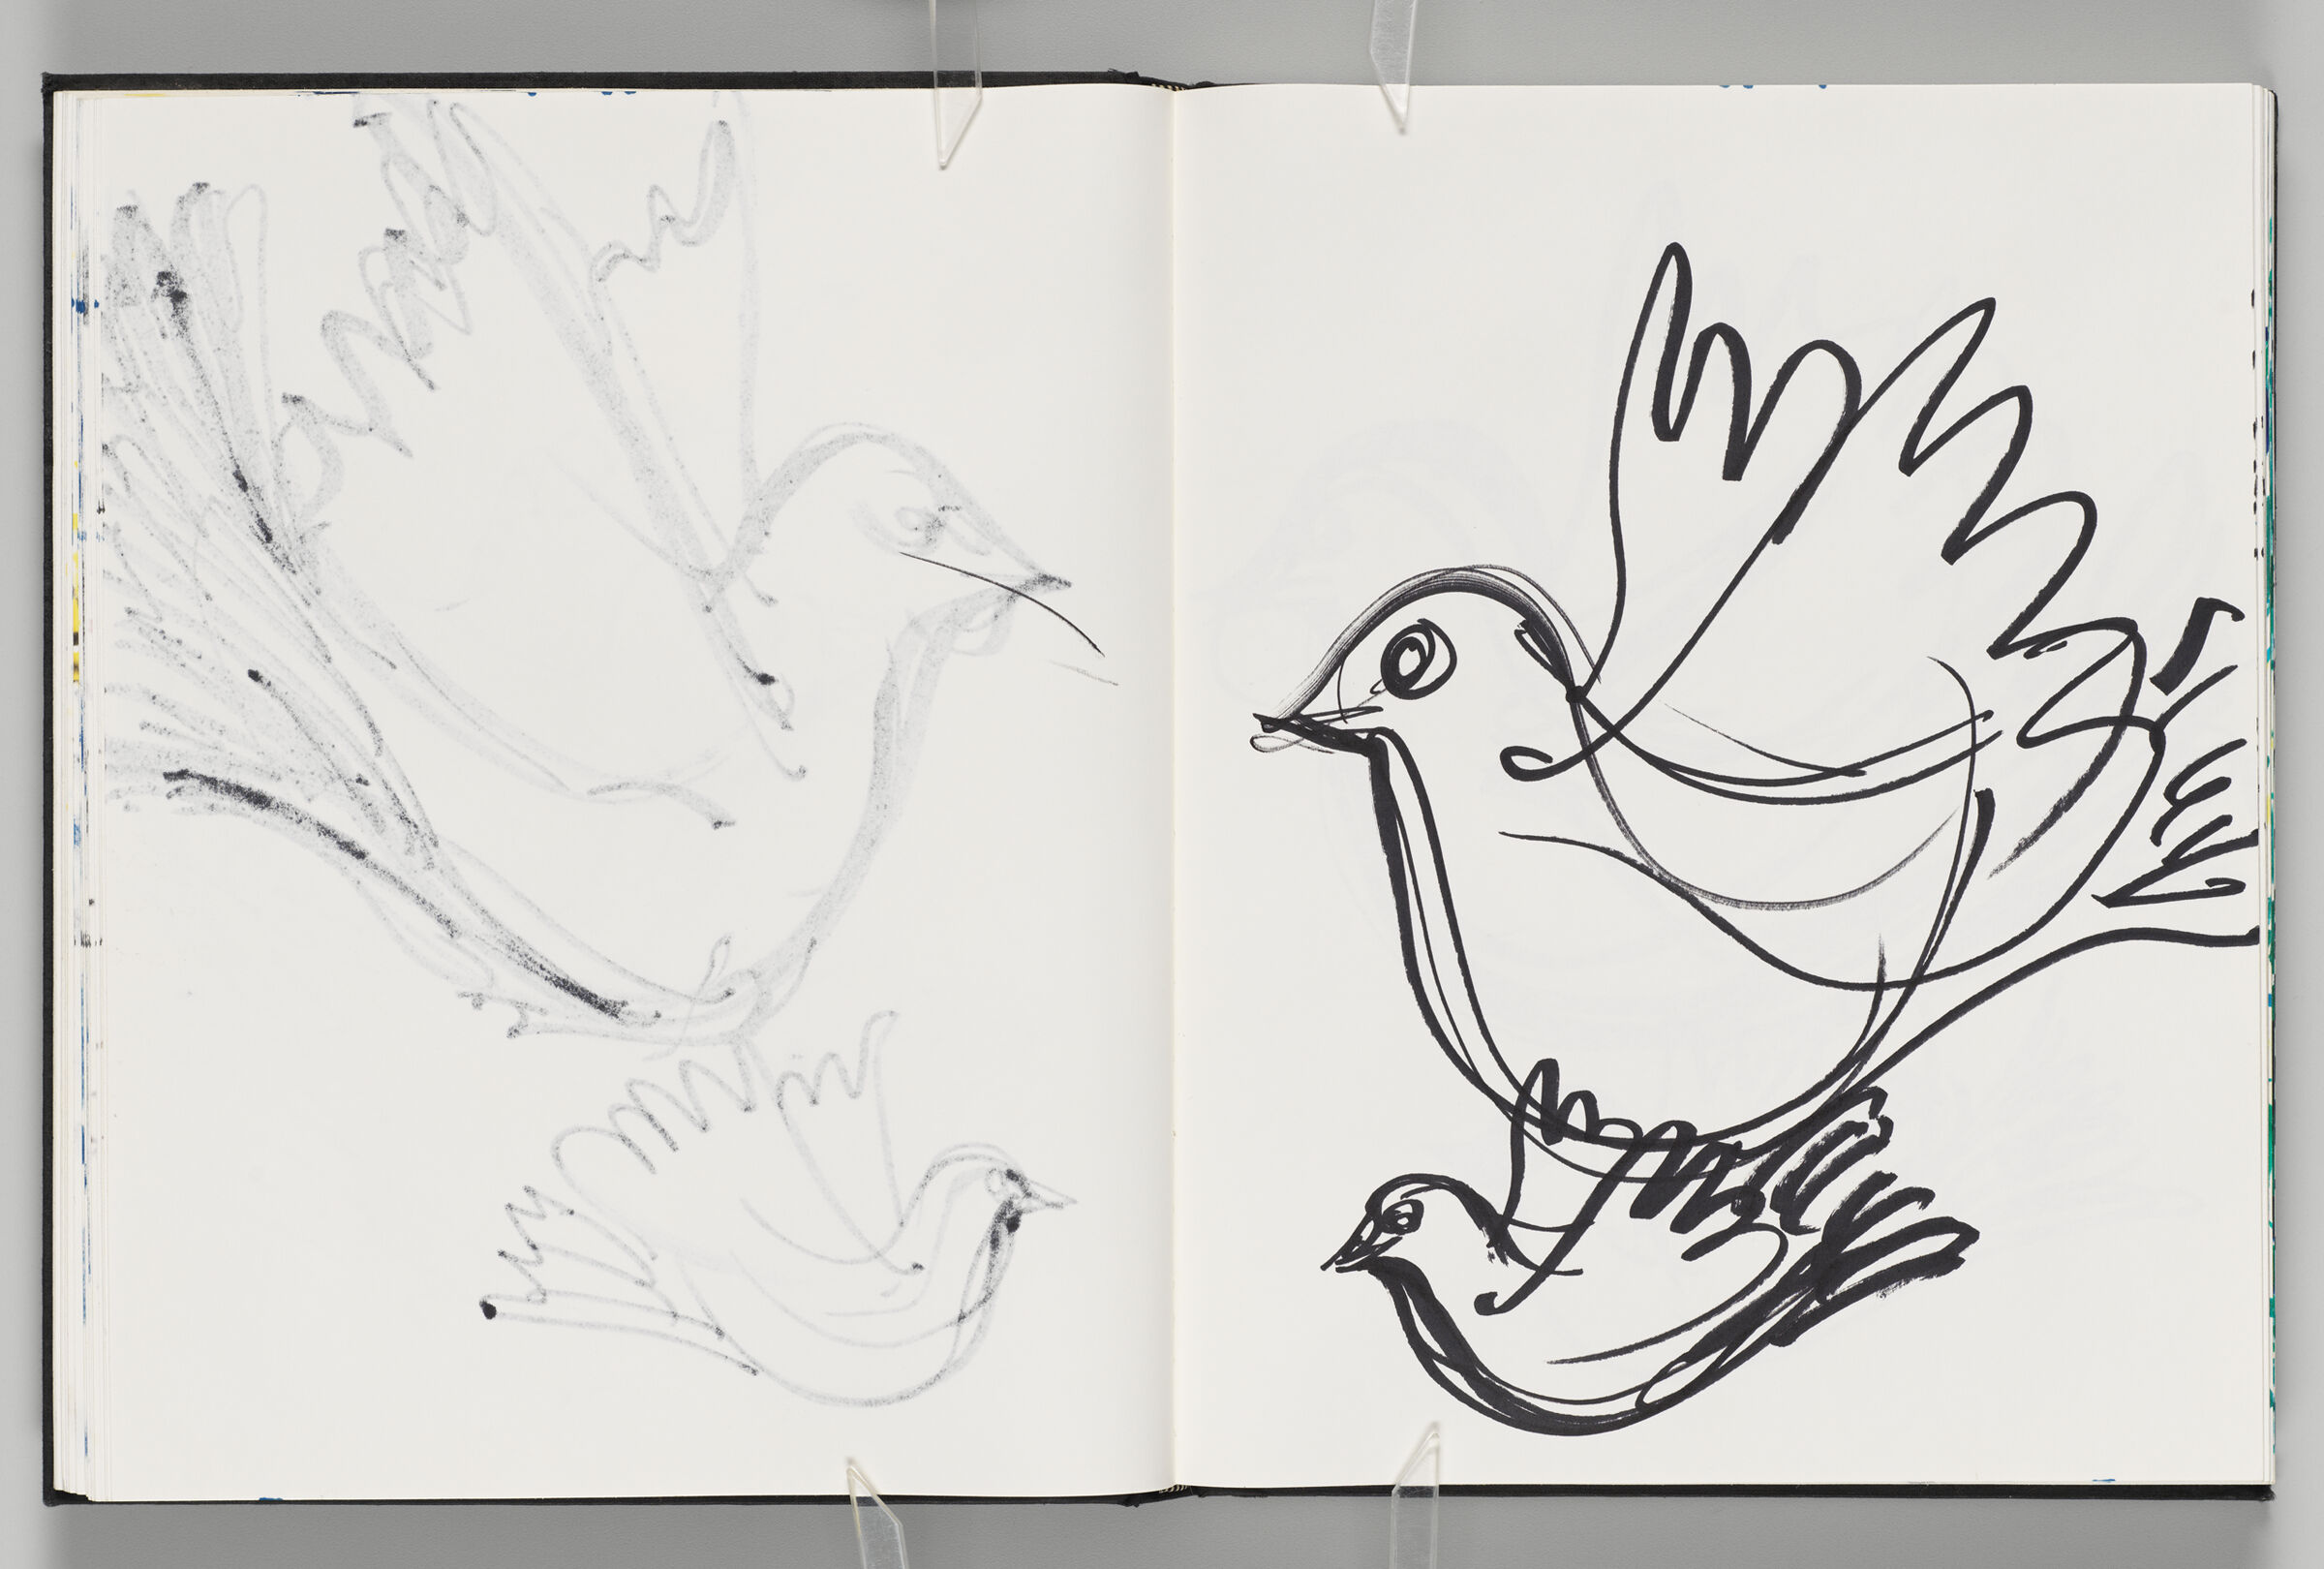 Untitled (Bleed-Through Of Previous Page, Left Page); Untitled (Doves, Right Page)
